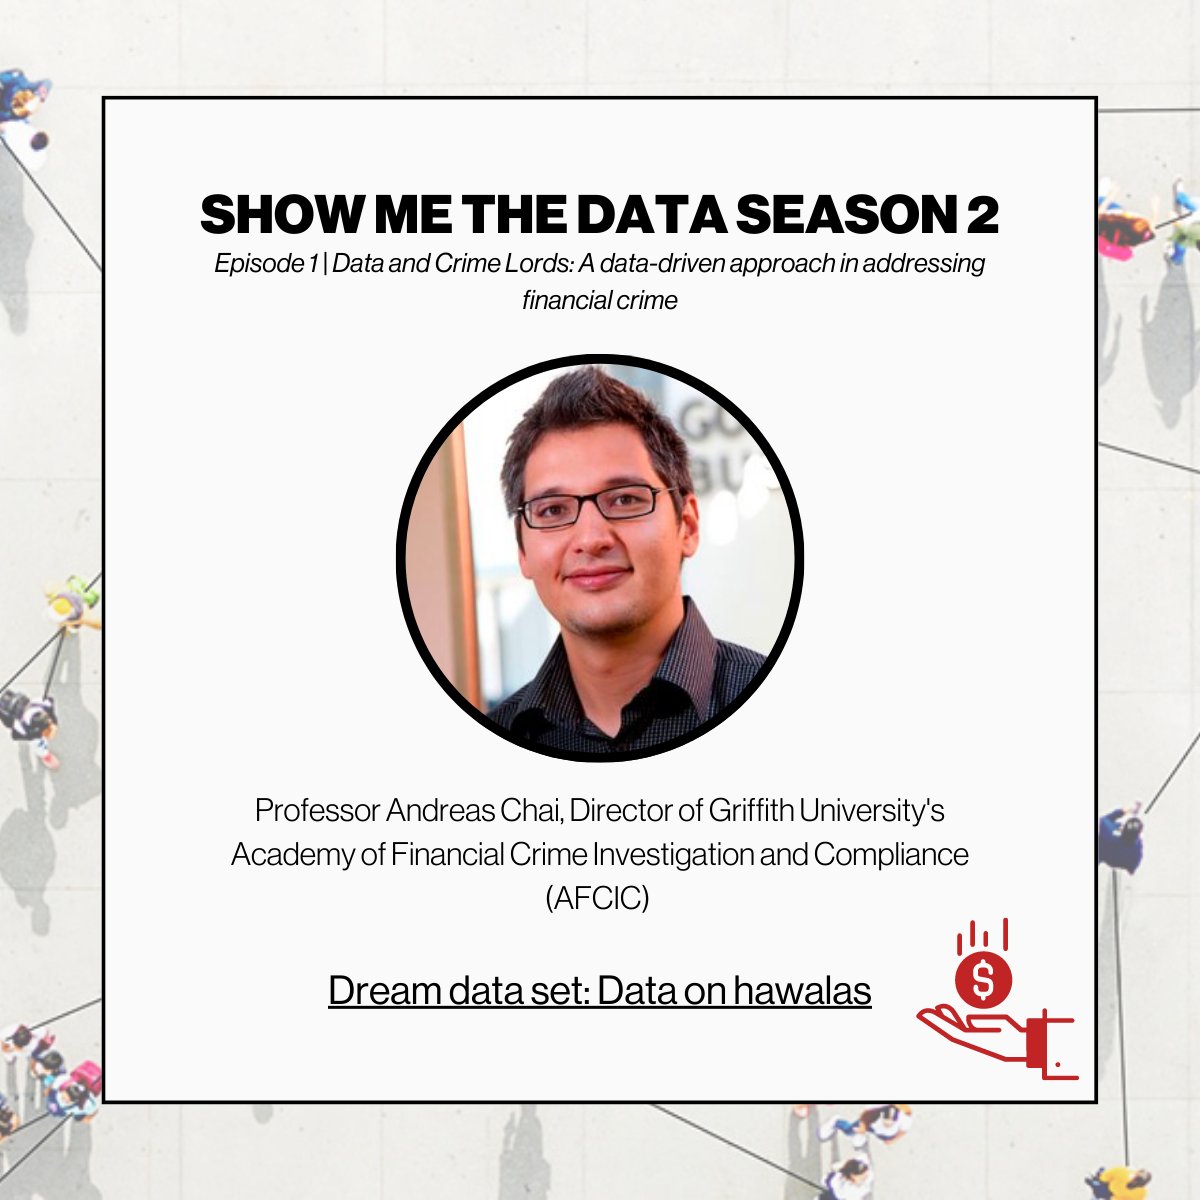 🌟 Trivia time! From Season 2, Episode 1 on The #ShowMeTheDataPodcast, what did Professor Andreas Chai (@andreaschai1) say his dream data set was? If you said 'hawalas,' you're right! Listen to the podcast again here to learn more about hawalas: ridl.com.au/show-me-the-da… 🎧